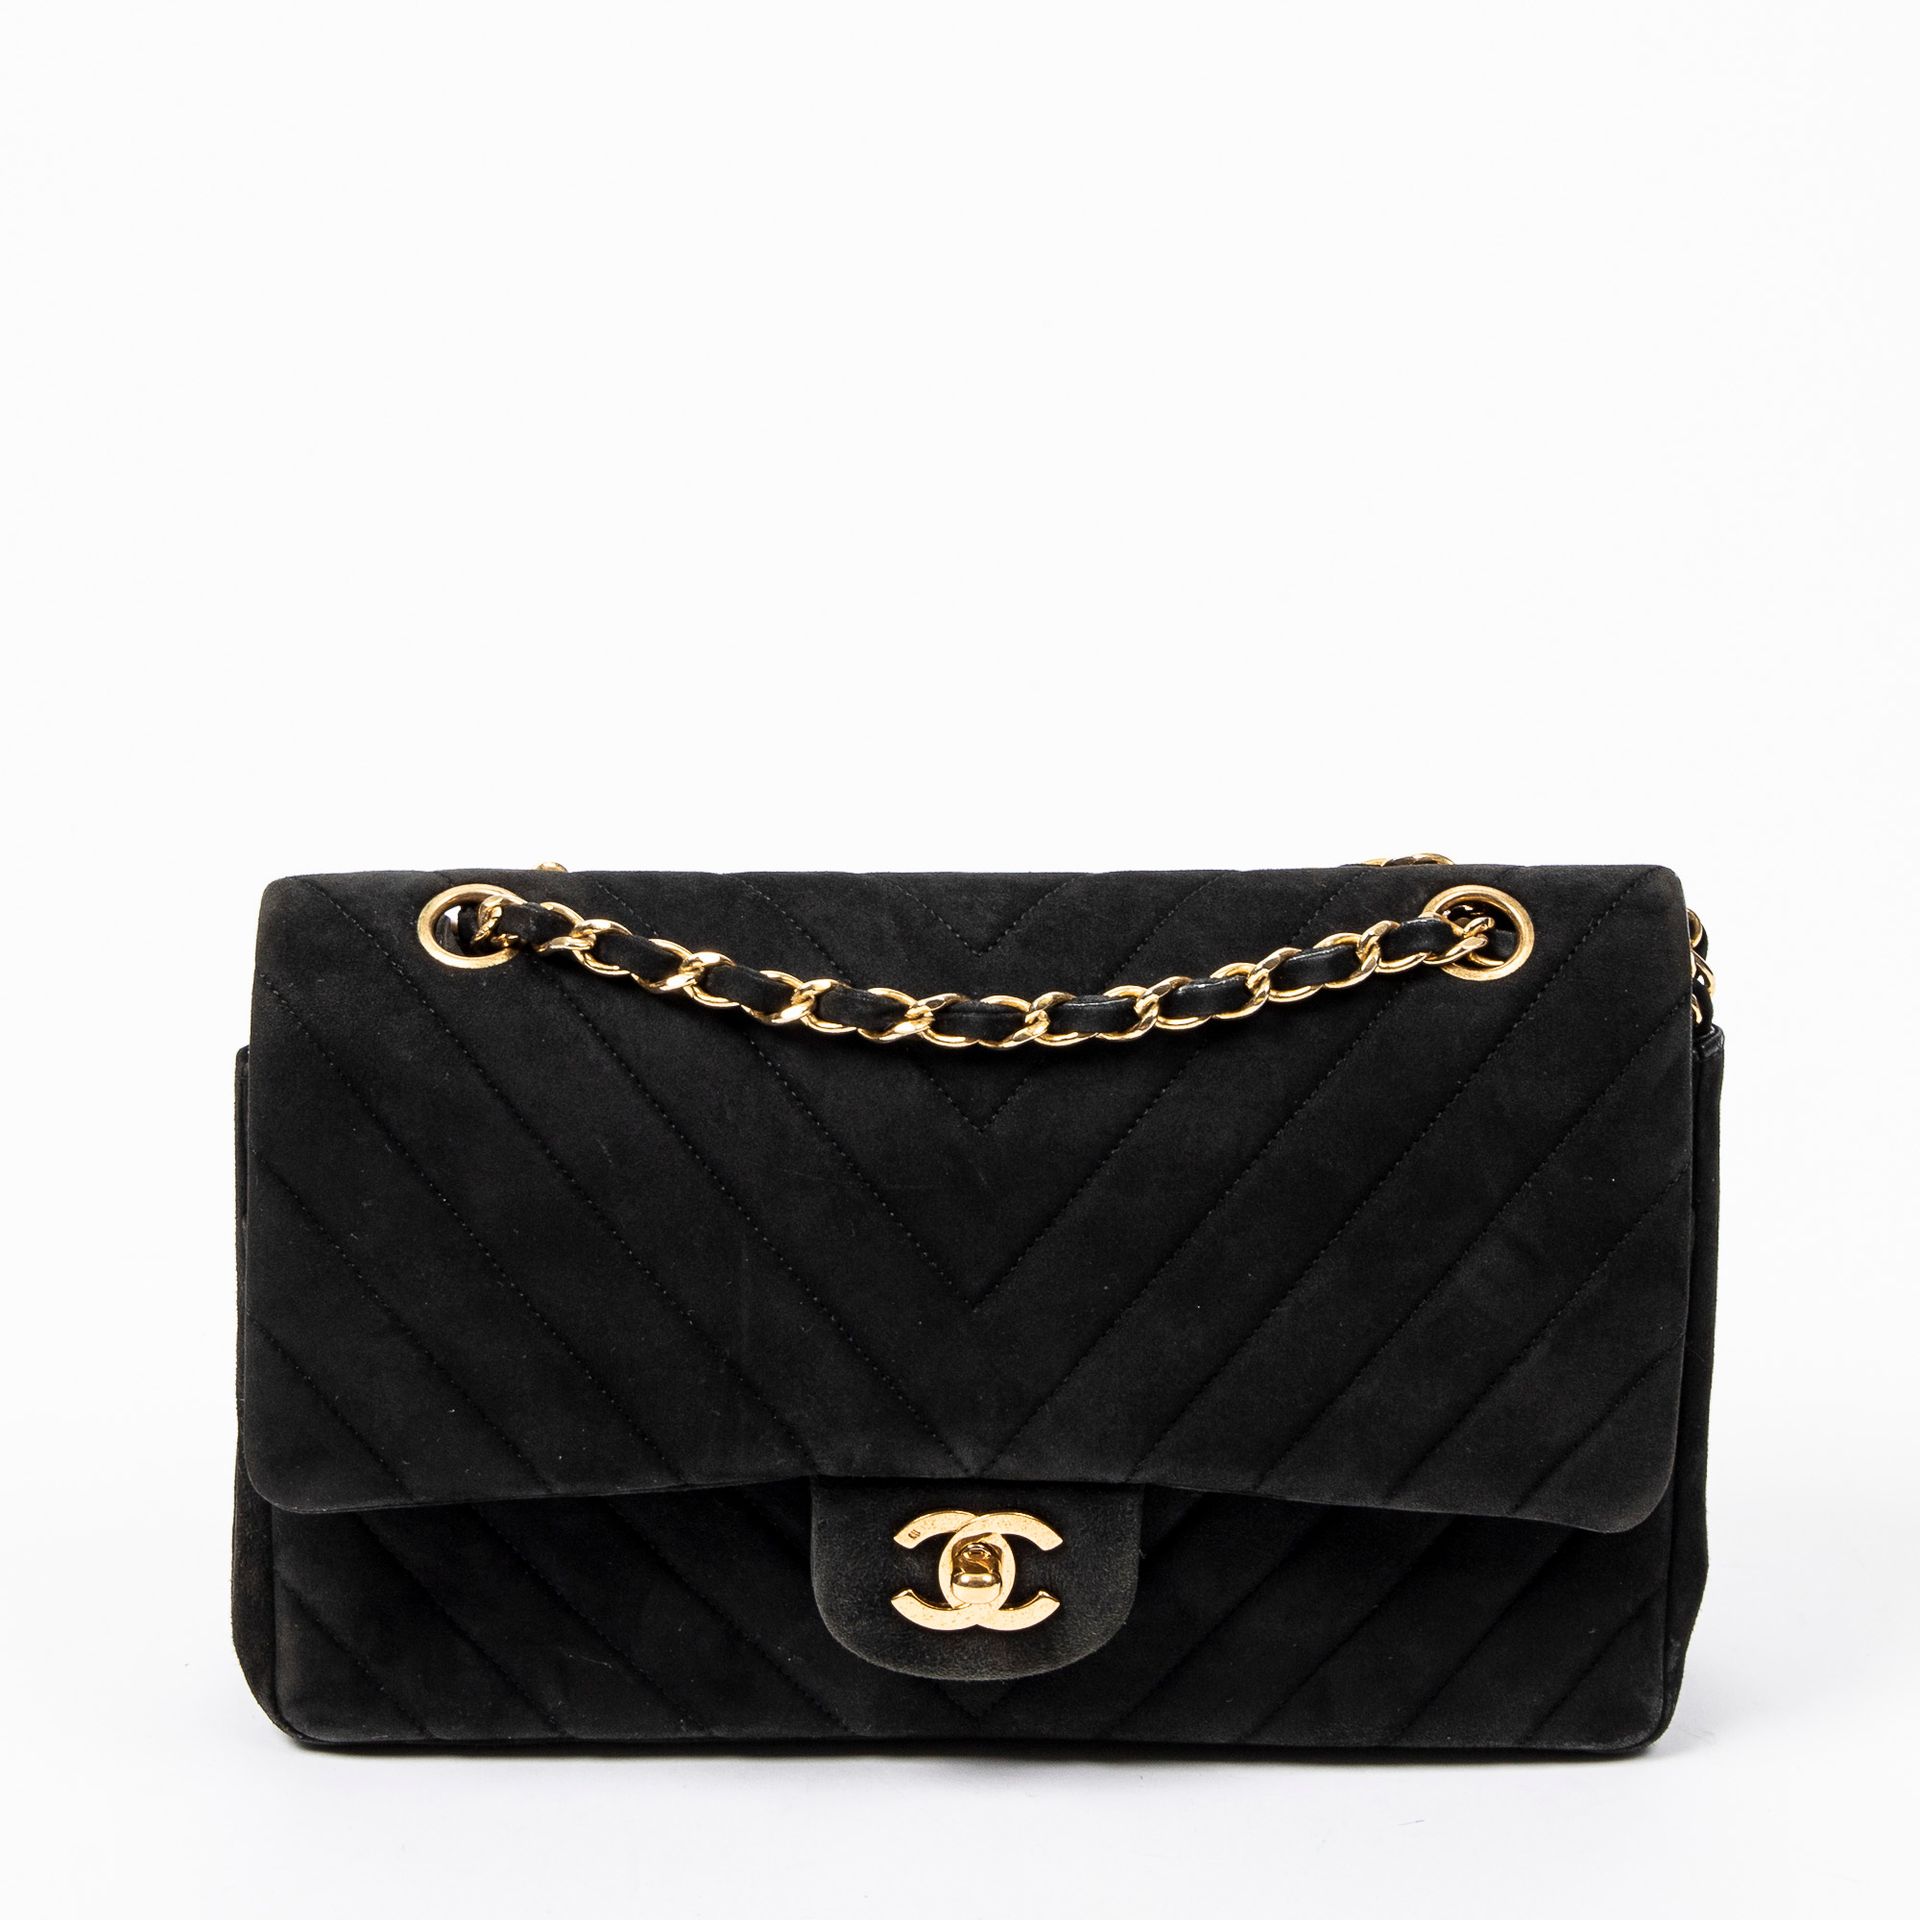 Chanel CHANEL - Timeless bag with double flaps in black leather - Inside lined i&hellip;